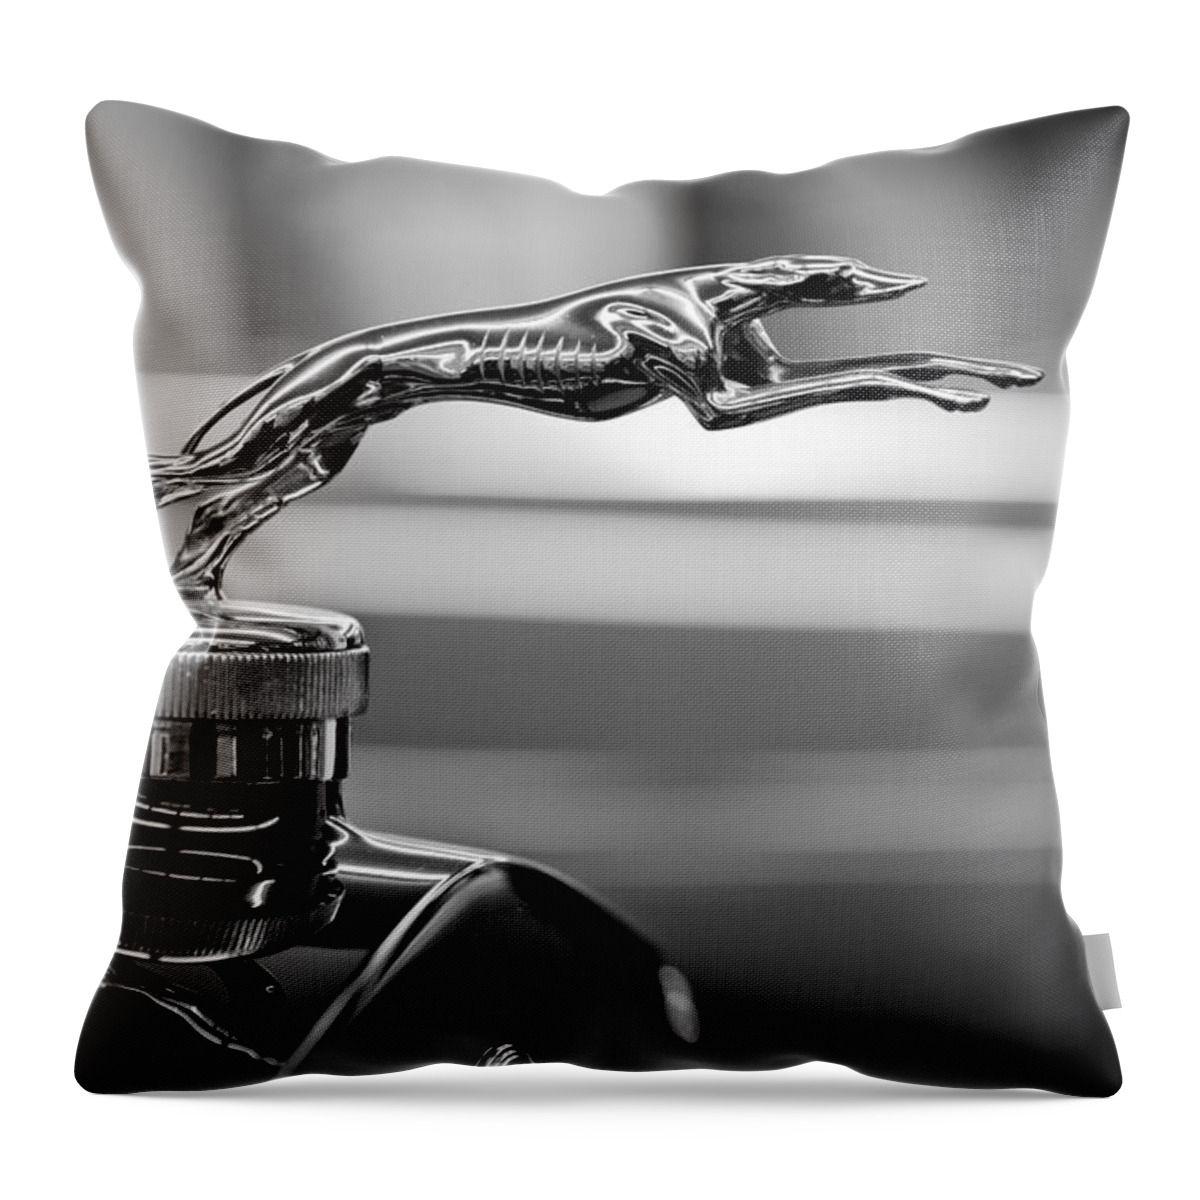 1925 Lincoln Throw Pillow featuring the photograph 1925 Lincoln Town Car Hood Ornament by Sebastian Musial